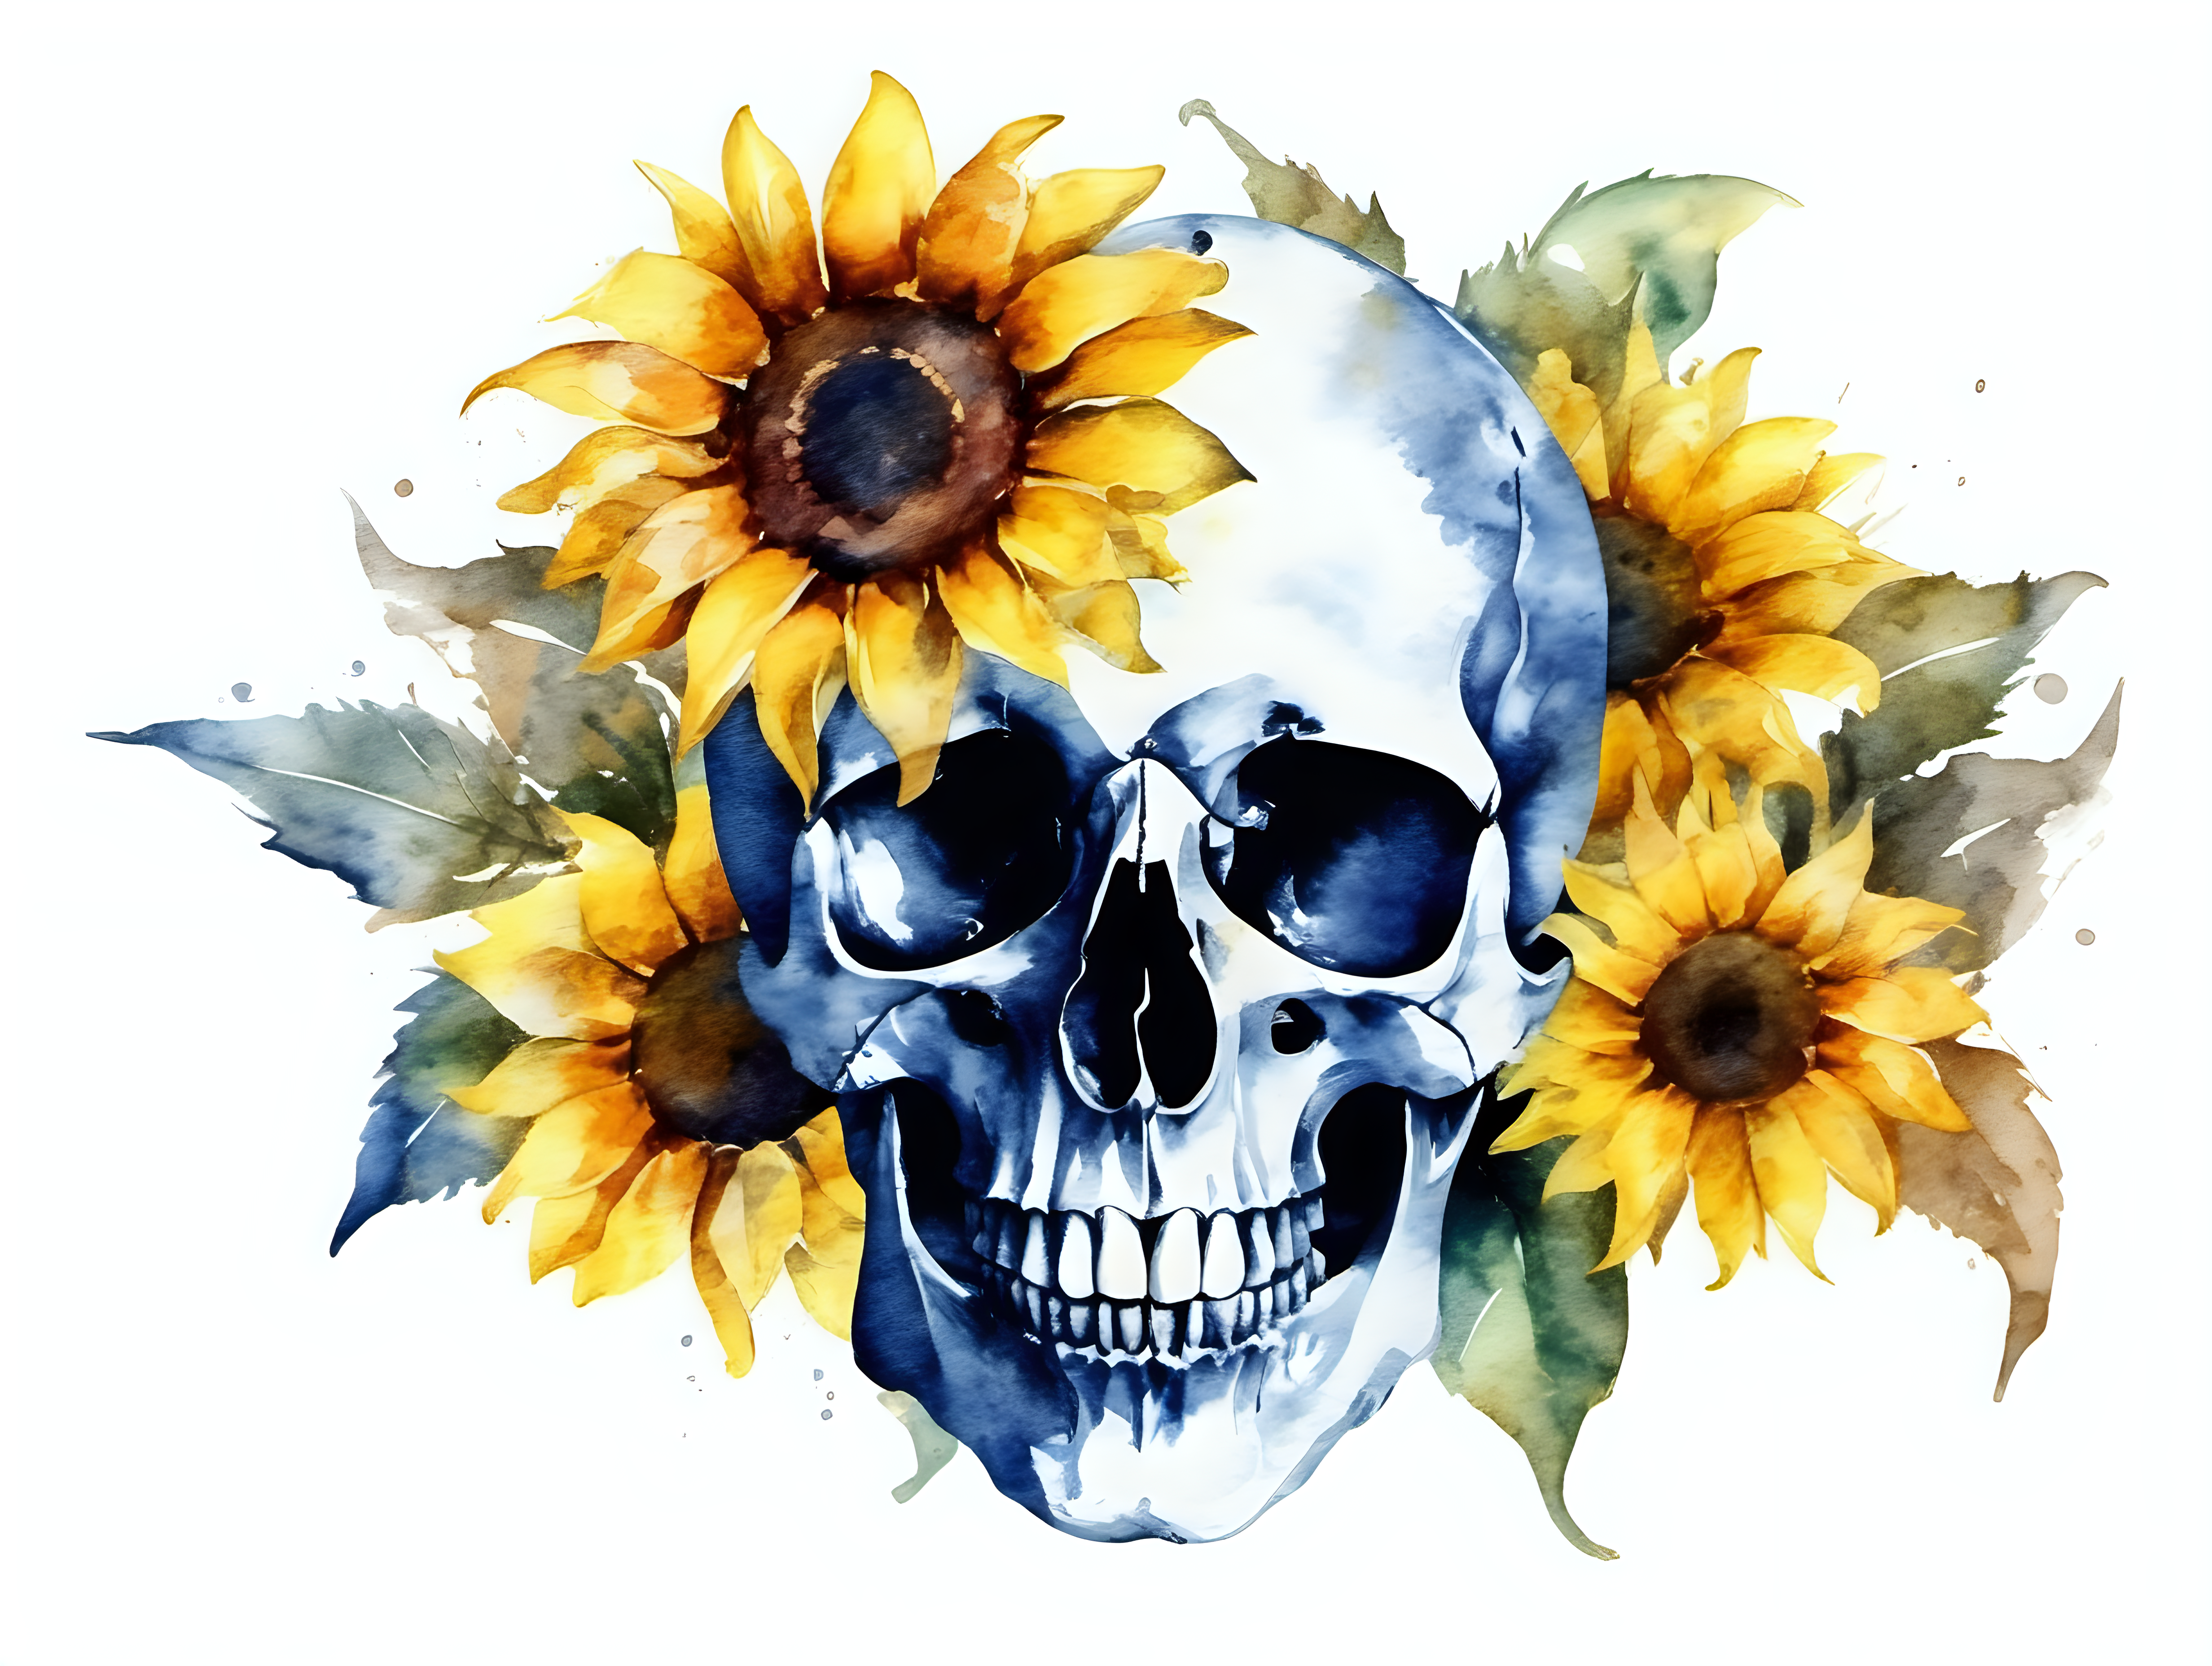  human skull with sunflower
 blossom in the style of watercolor, on a white background